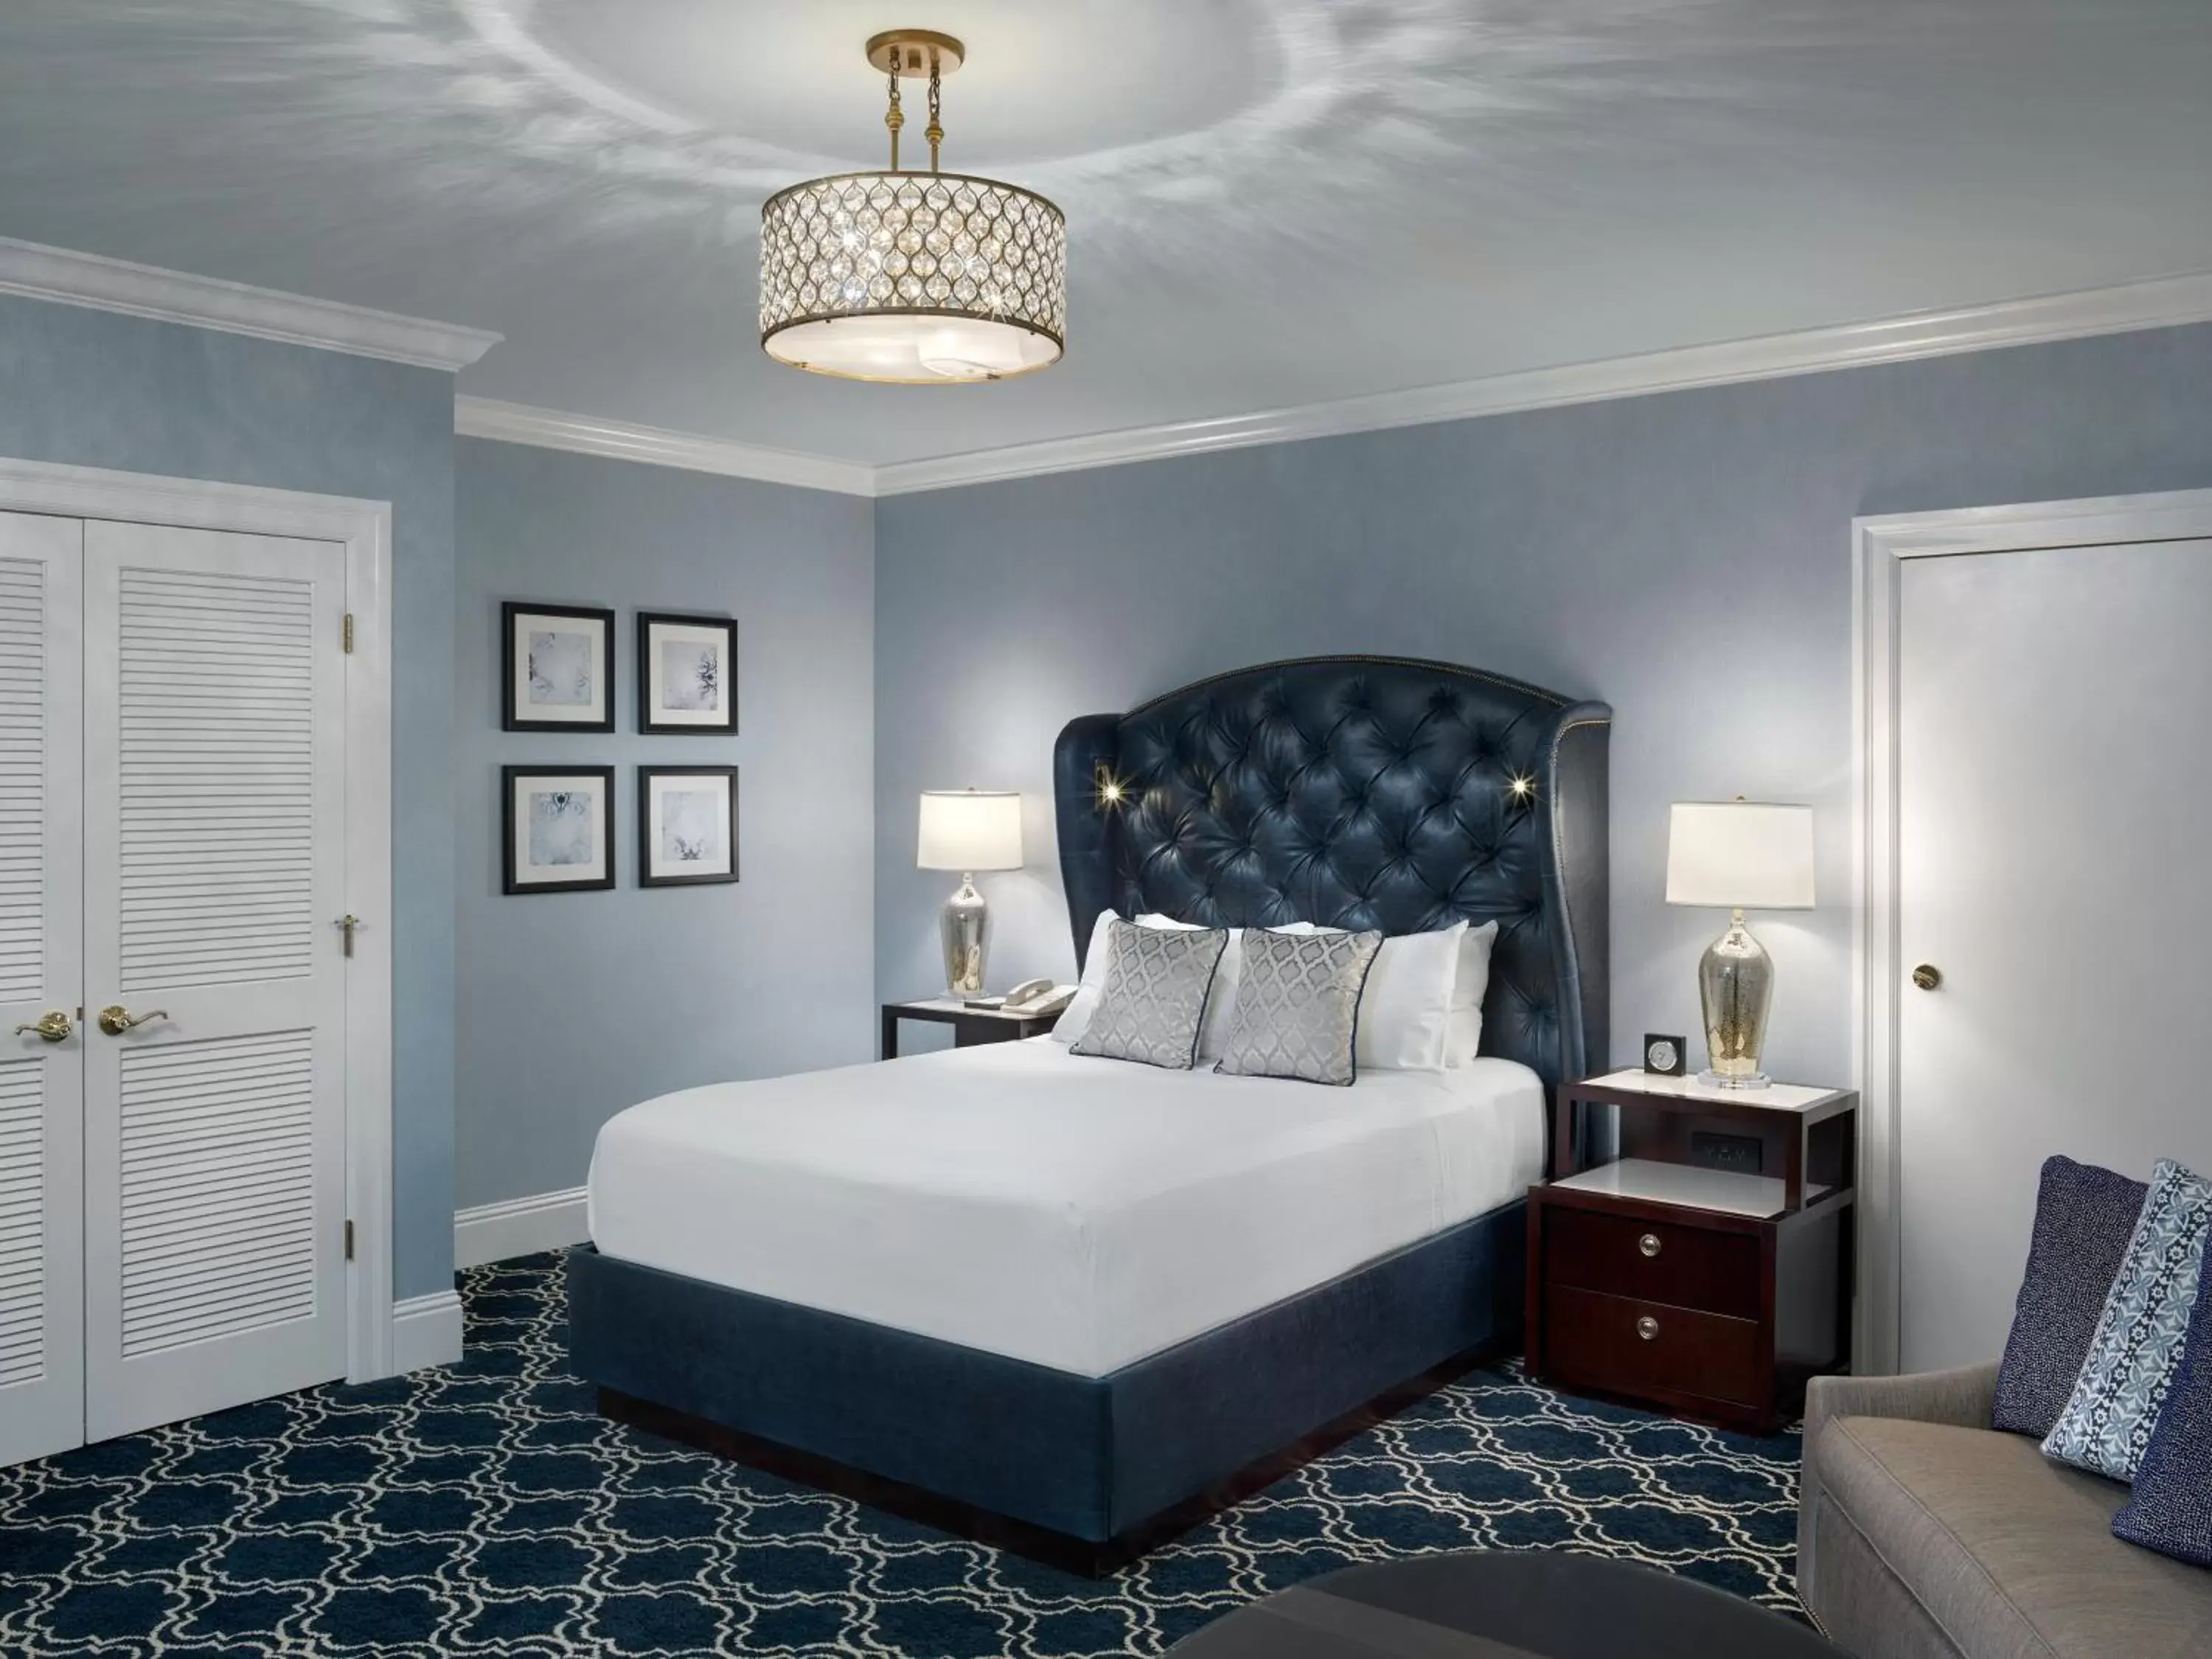 Moderate Queen Room - single occupancy in The Claremont Club & Spa, A Fairmont Hotel